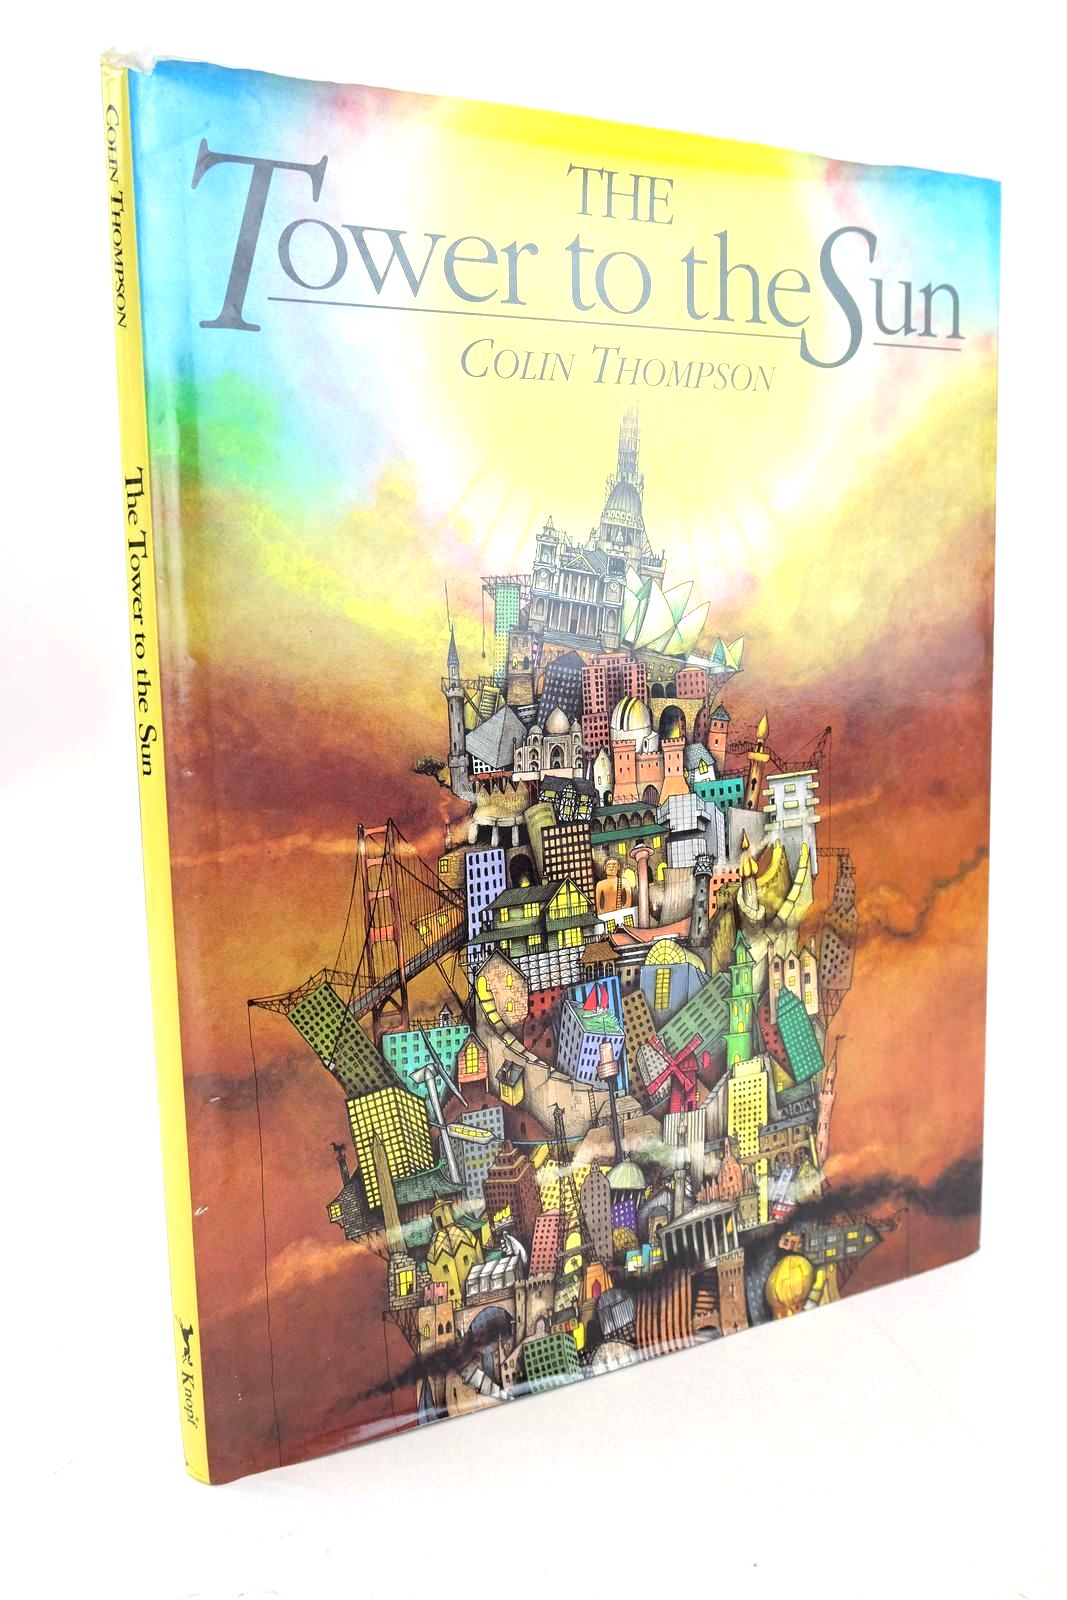 Photo of THE TOWER TO THE SUN written by Thompson, Colin illustrated by Thompson, Colin published by Alfred A. Knopf (STOCK CODE: 1327534)  for sale by Stella & Rose's Books